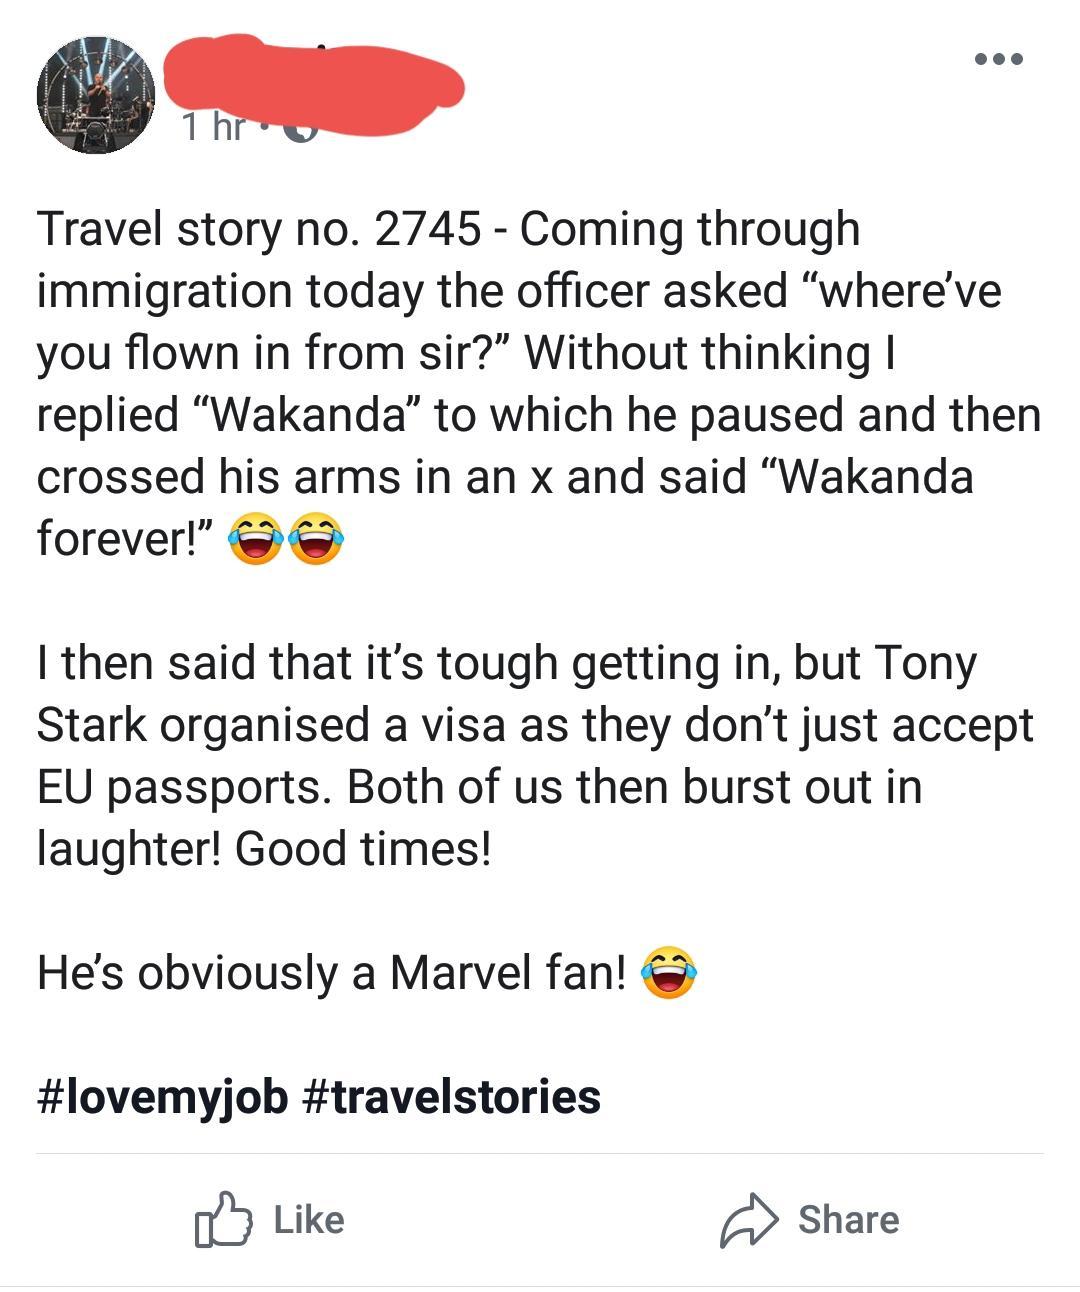 online liars- angle - Travel story no. 2745 Coming through immigration today the officer asked where've you flown in from sir?" Without thinking replied Wakanda to which he paused and then crossed his arms in an x and said "Wakanda forever!" I then said t